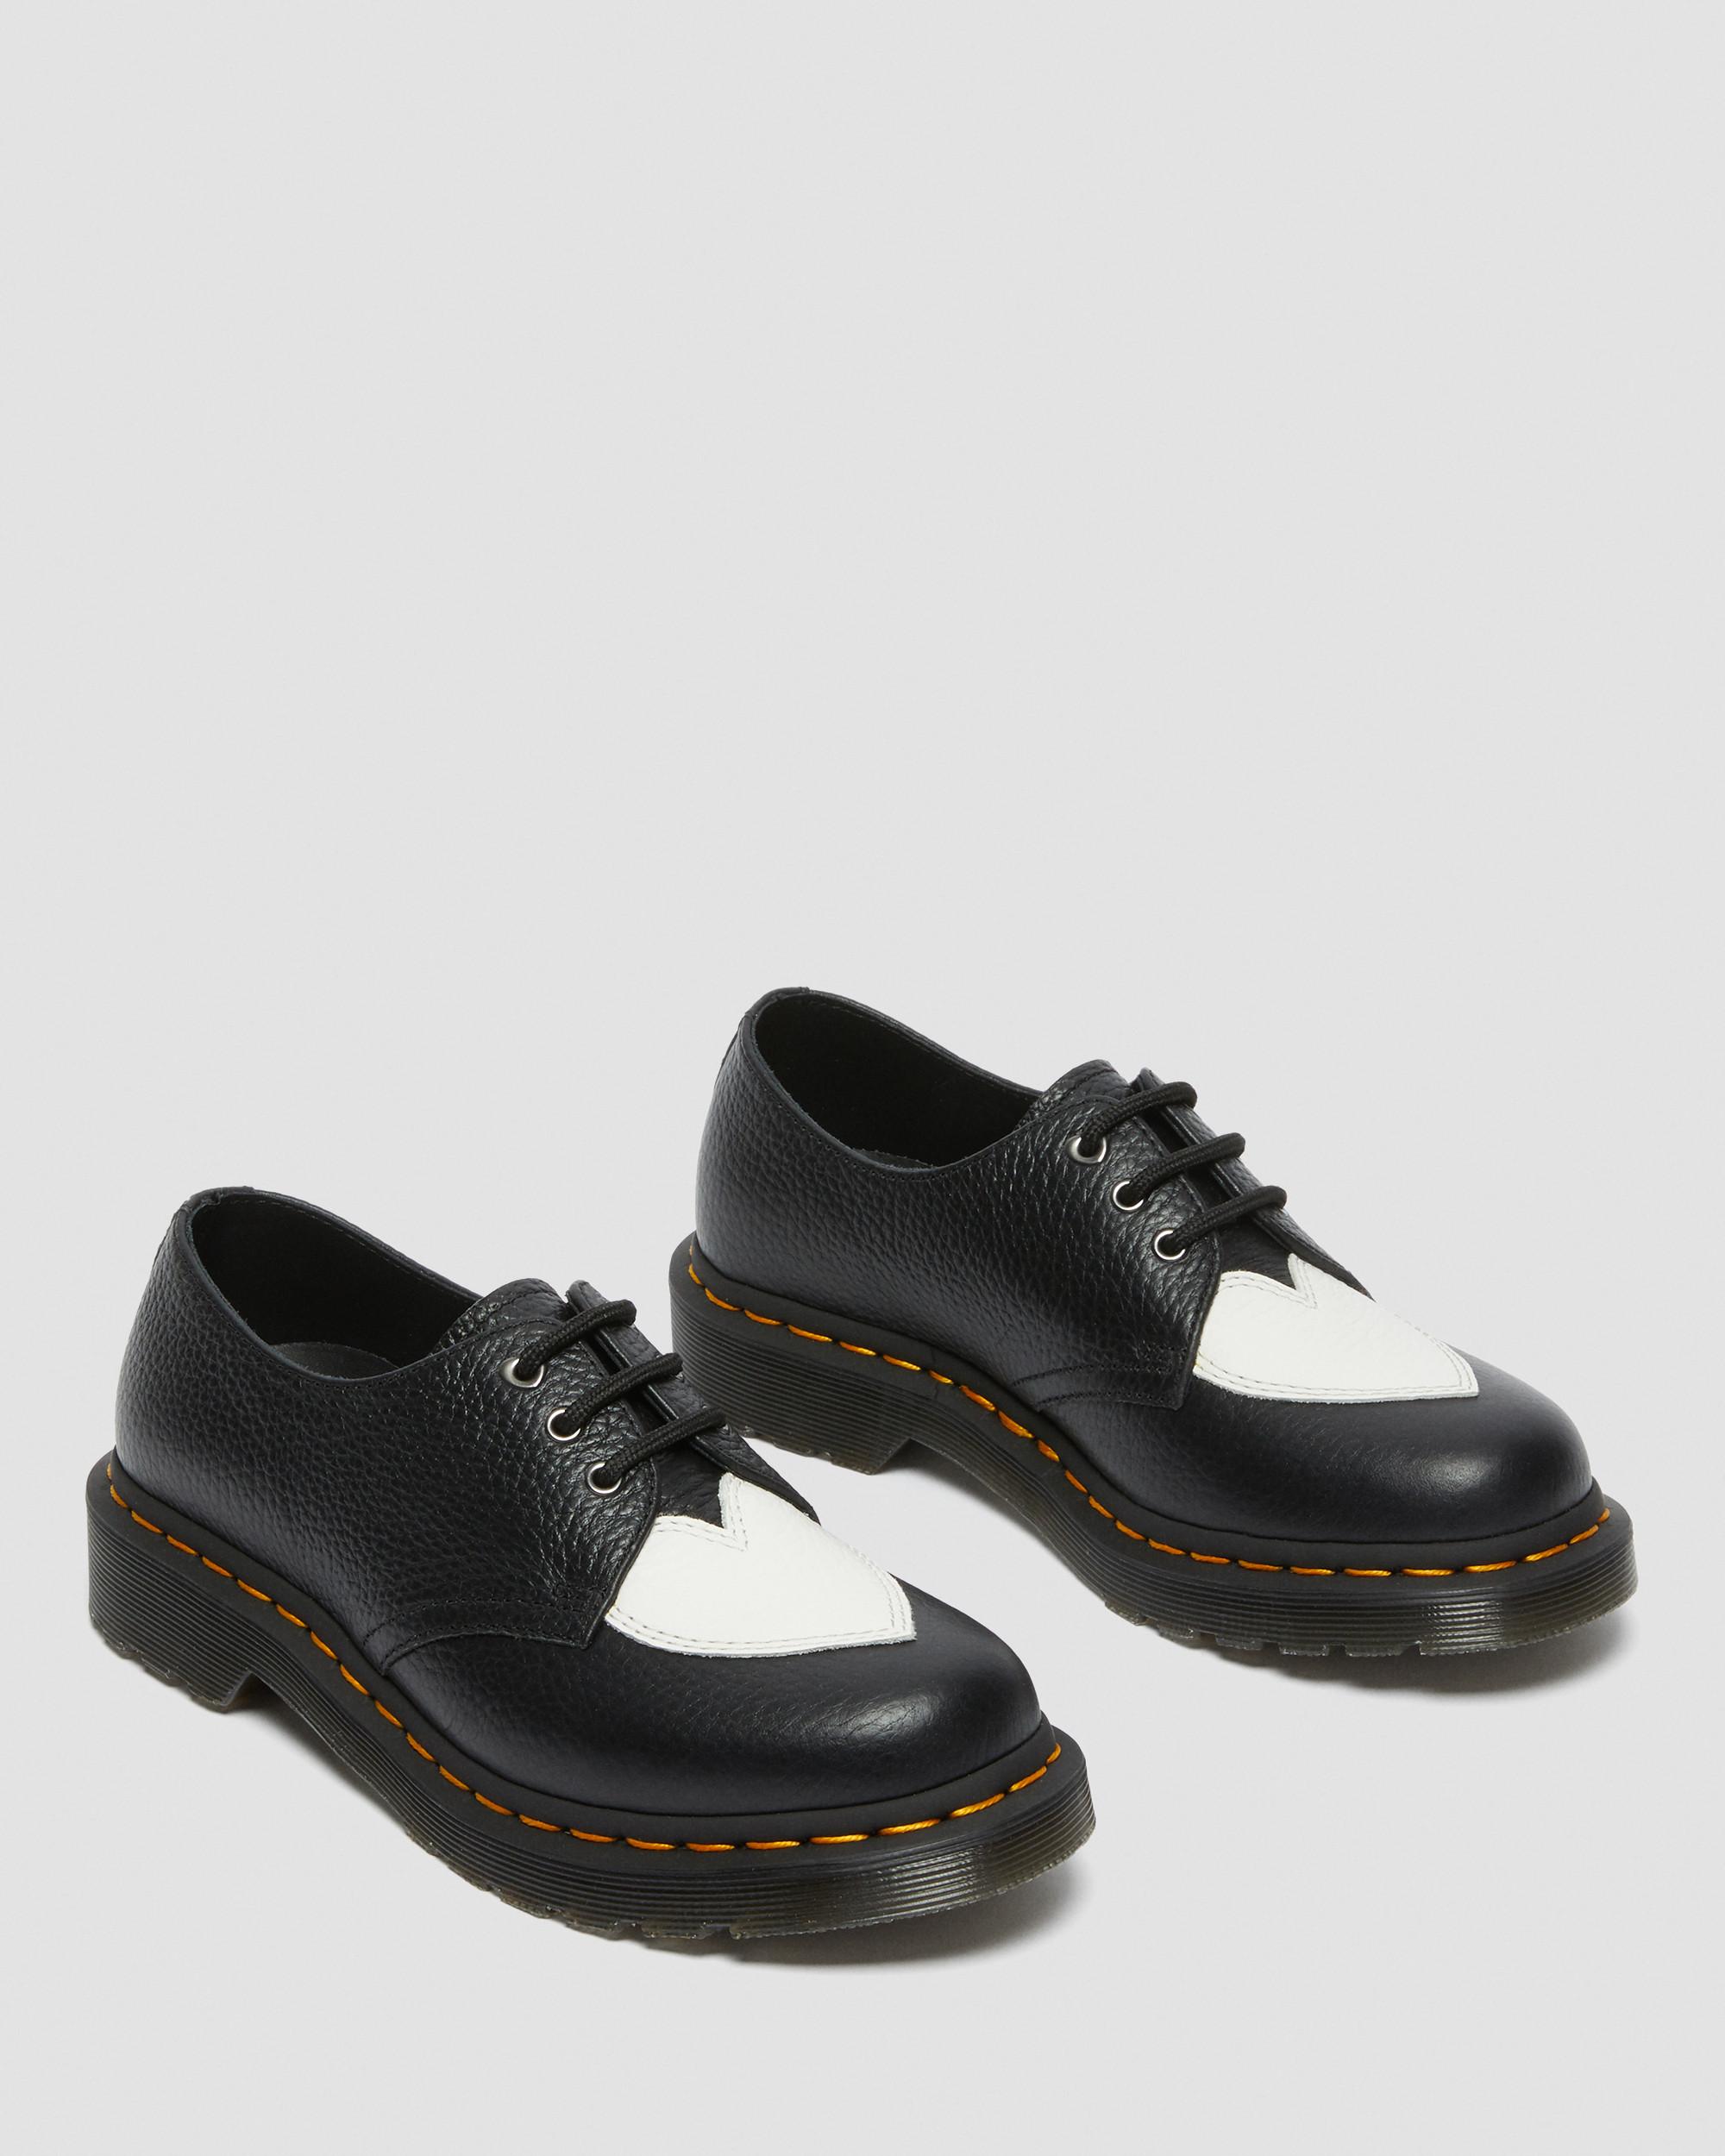 1461 Amore Leather Oxford Shoes | Dr. Martens